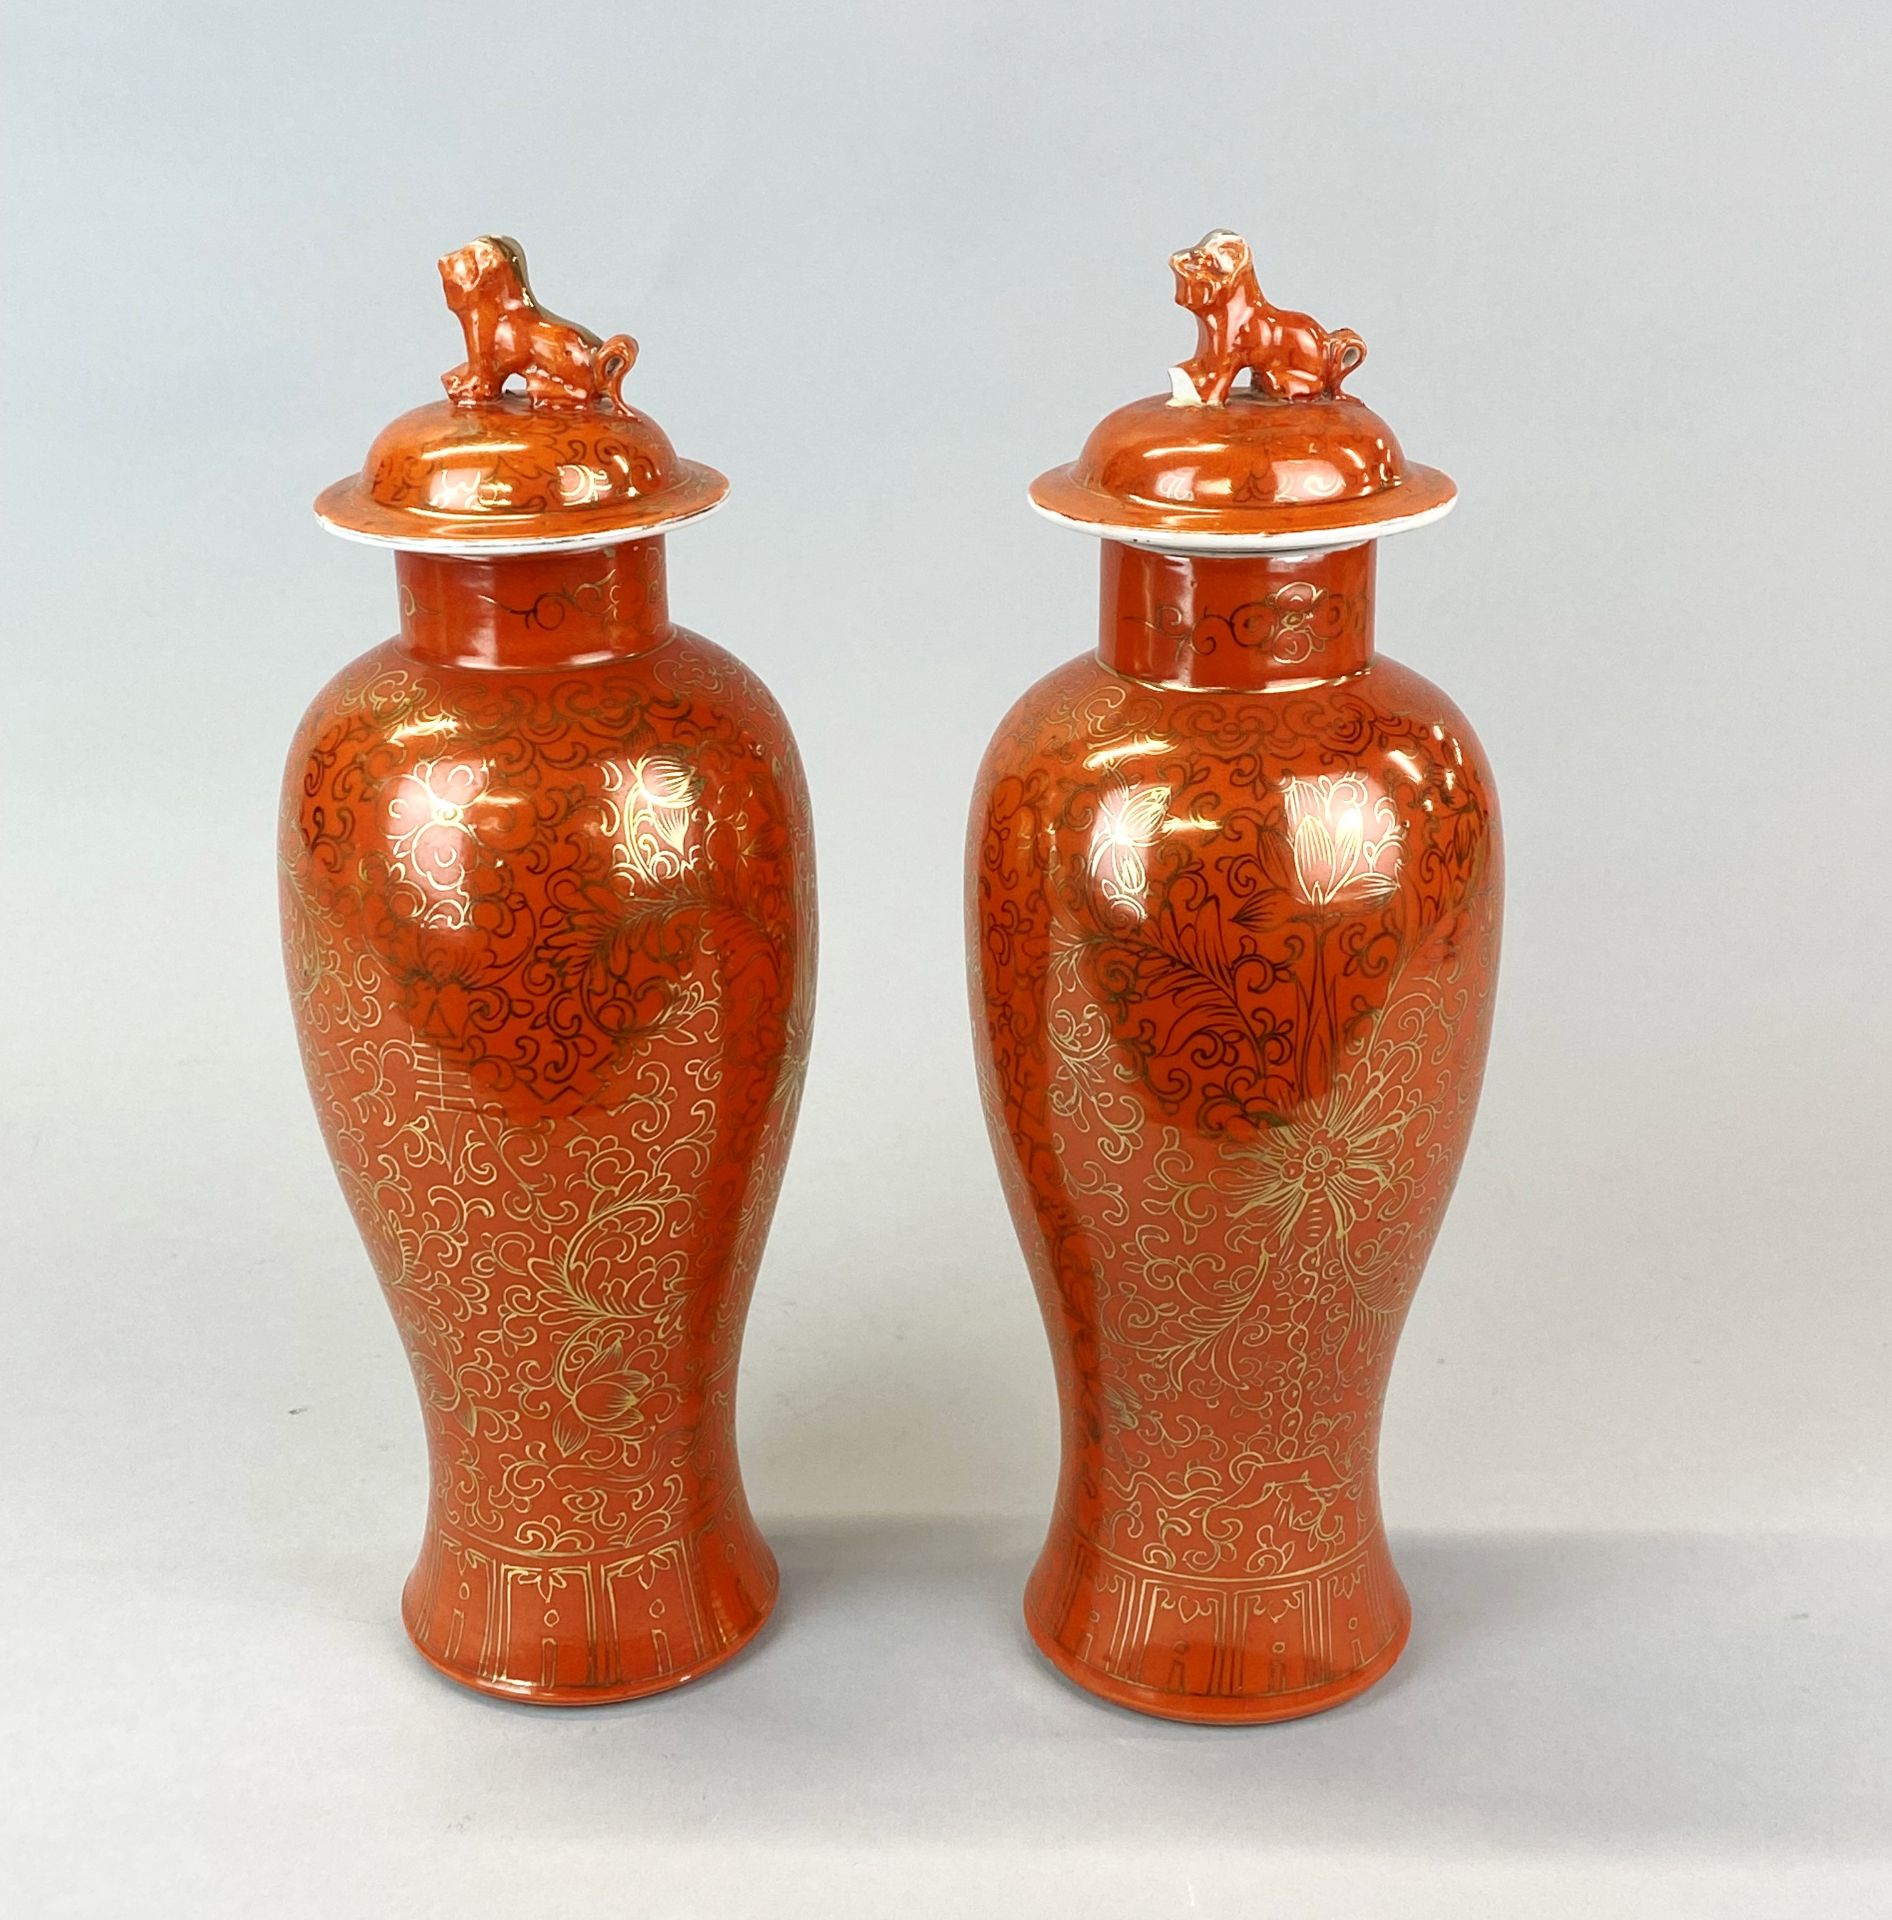 A pair of mid 20th Century Chinese orange glazed and gilt porcelain jars and lids, H. 31cm. One